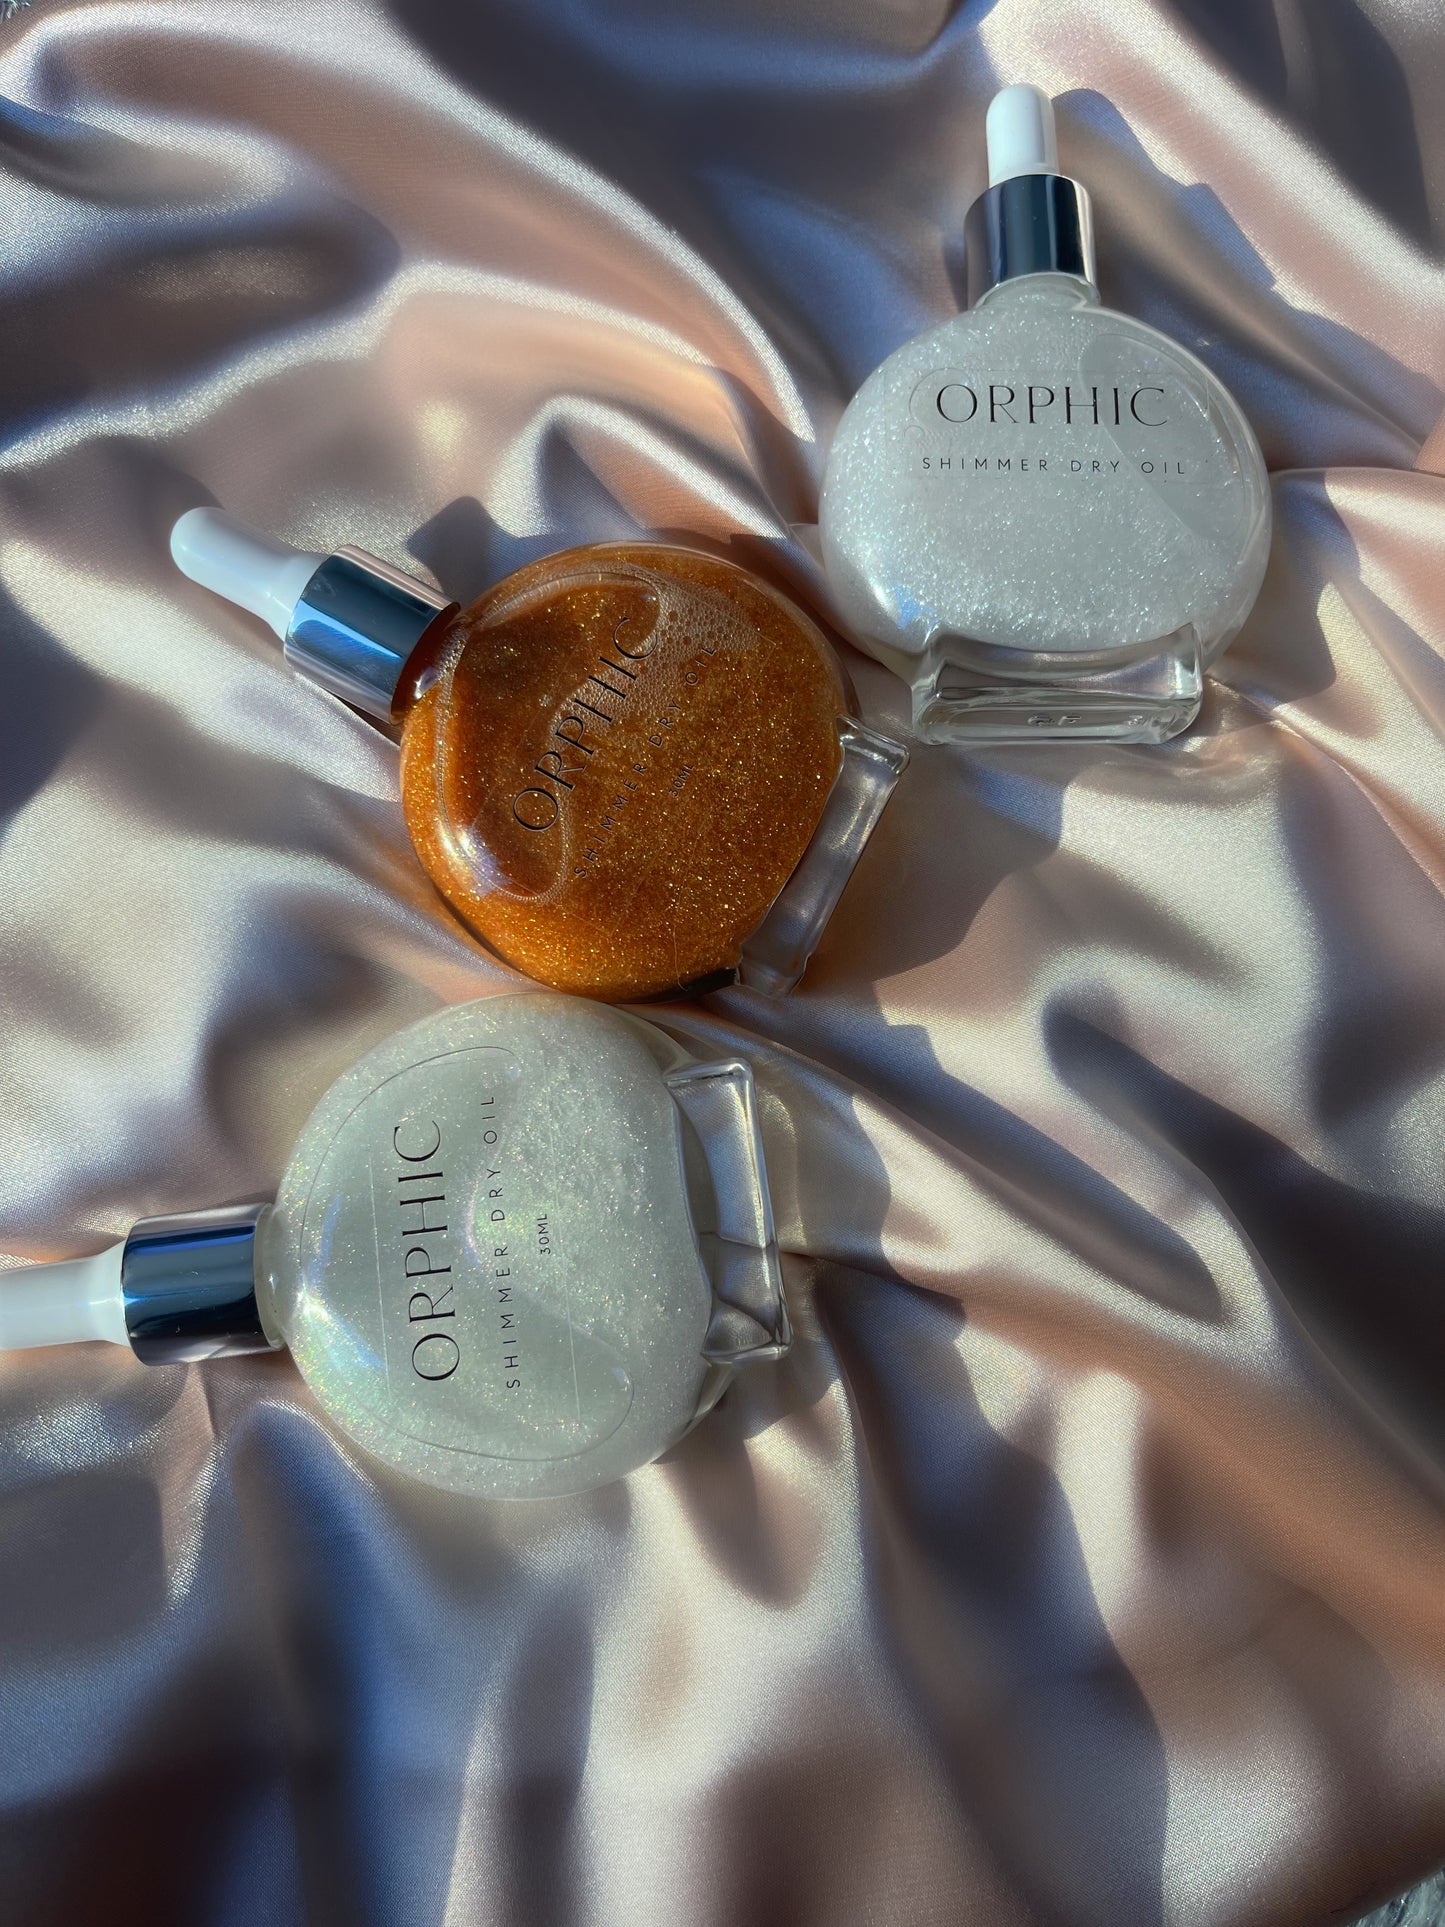 Limited Orphic Glowing Shimmer Dry Oil